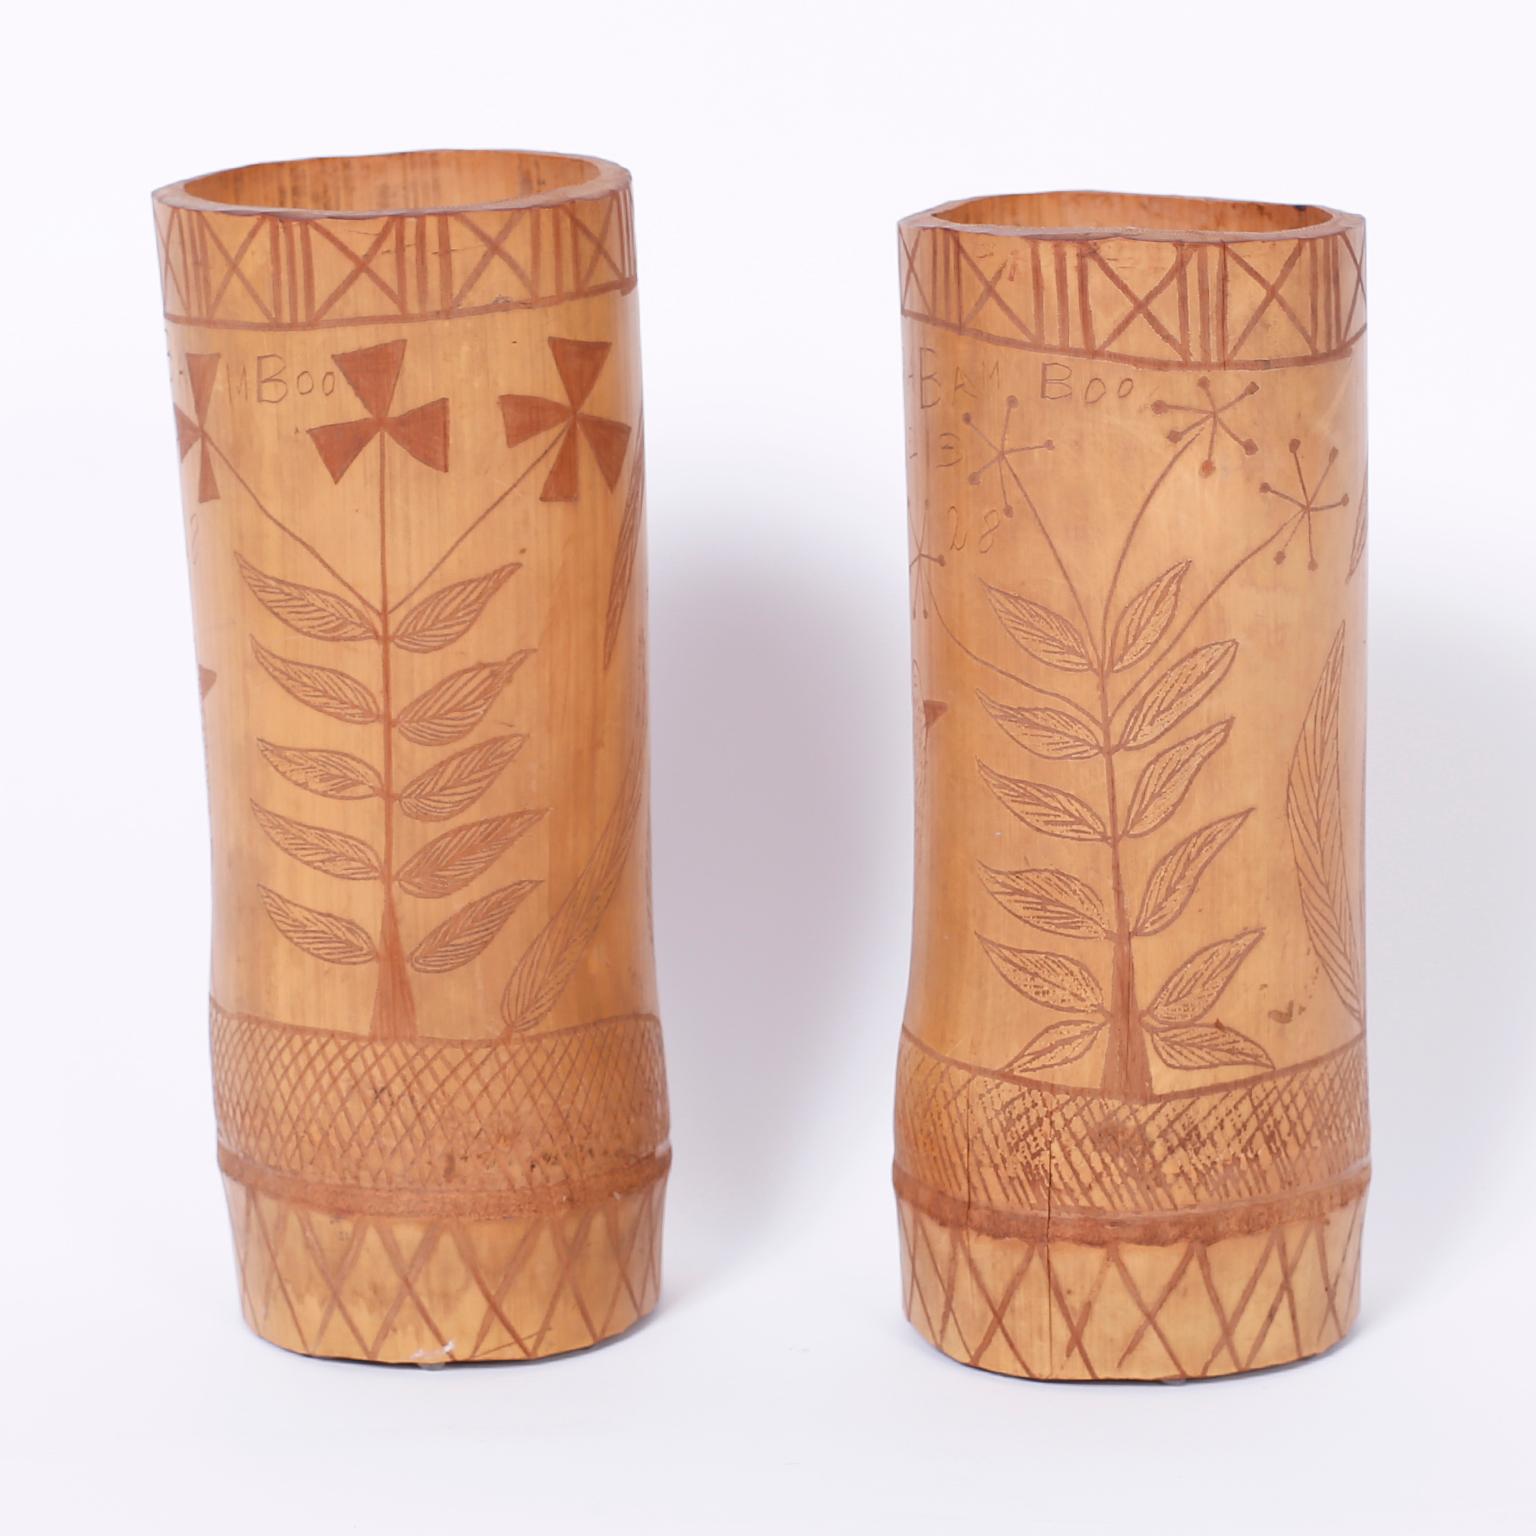 Folky pair of Jamaican vases or vessels crafted in bamboo with carved decorations of Palm Trees, birds, plants, and inscribed with the message Jamaican Bamboo Vase 1928. 

The height of the shorter vase is 10.5.